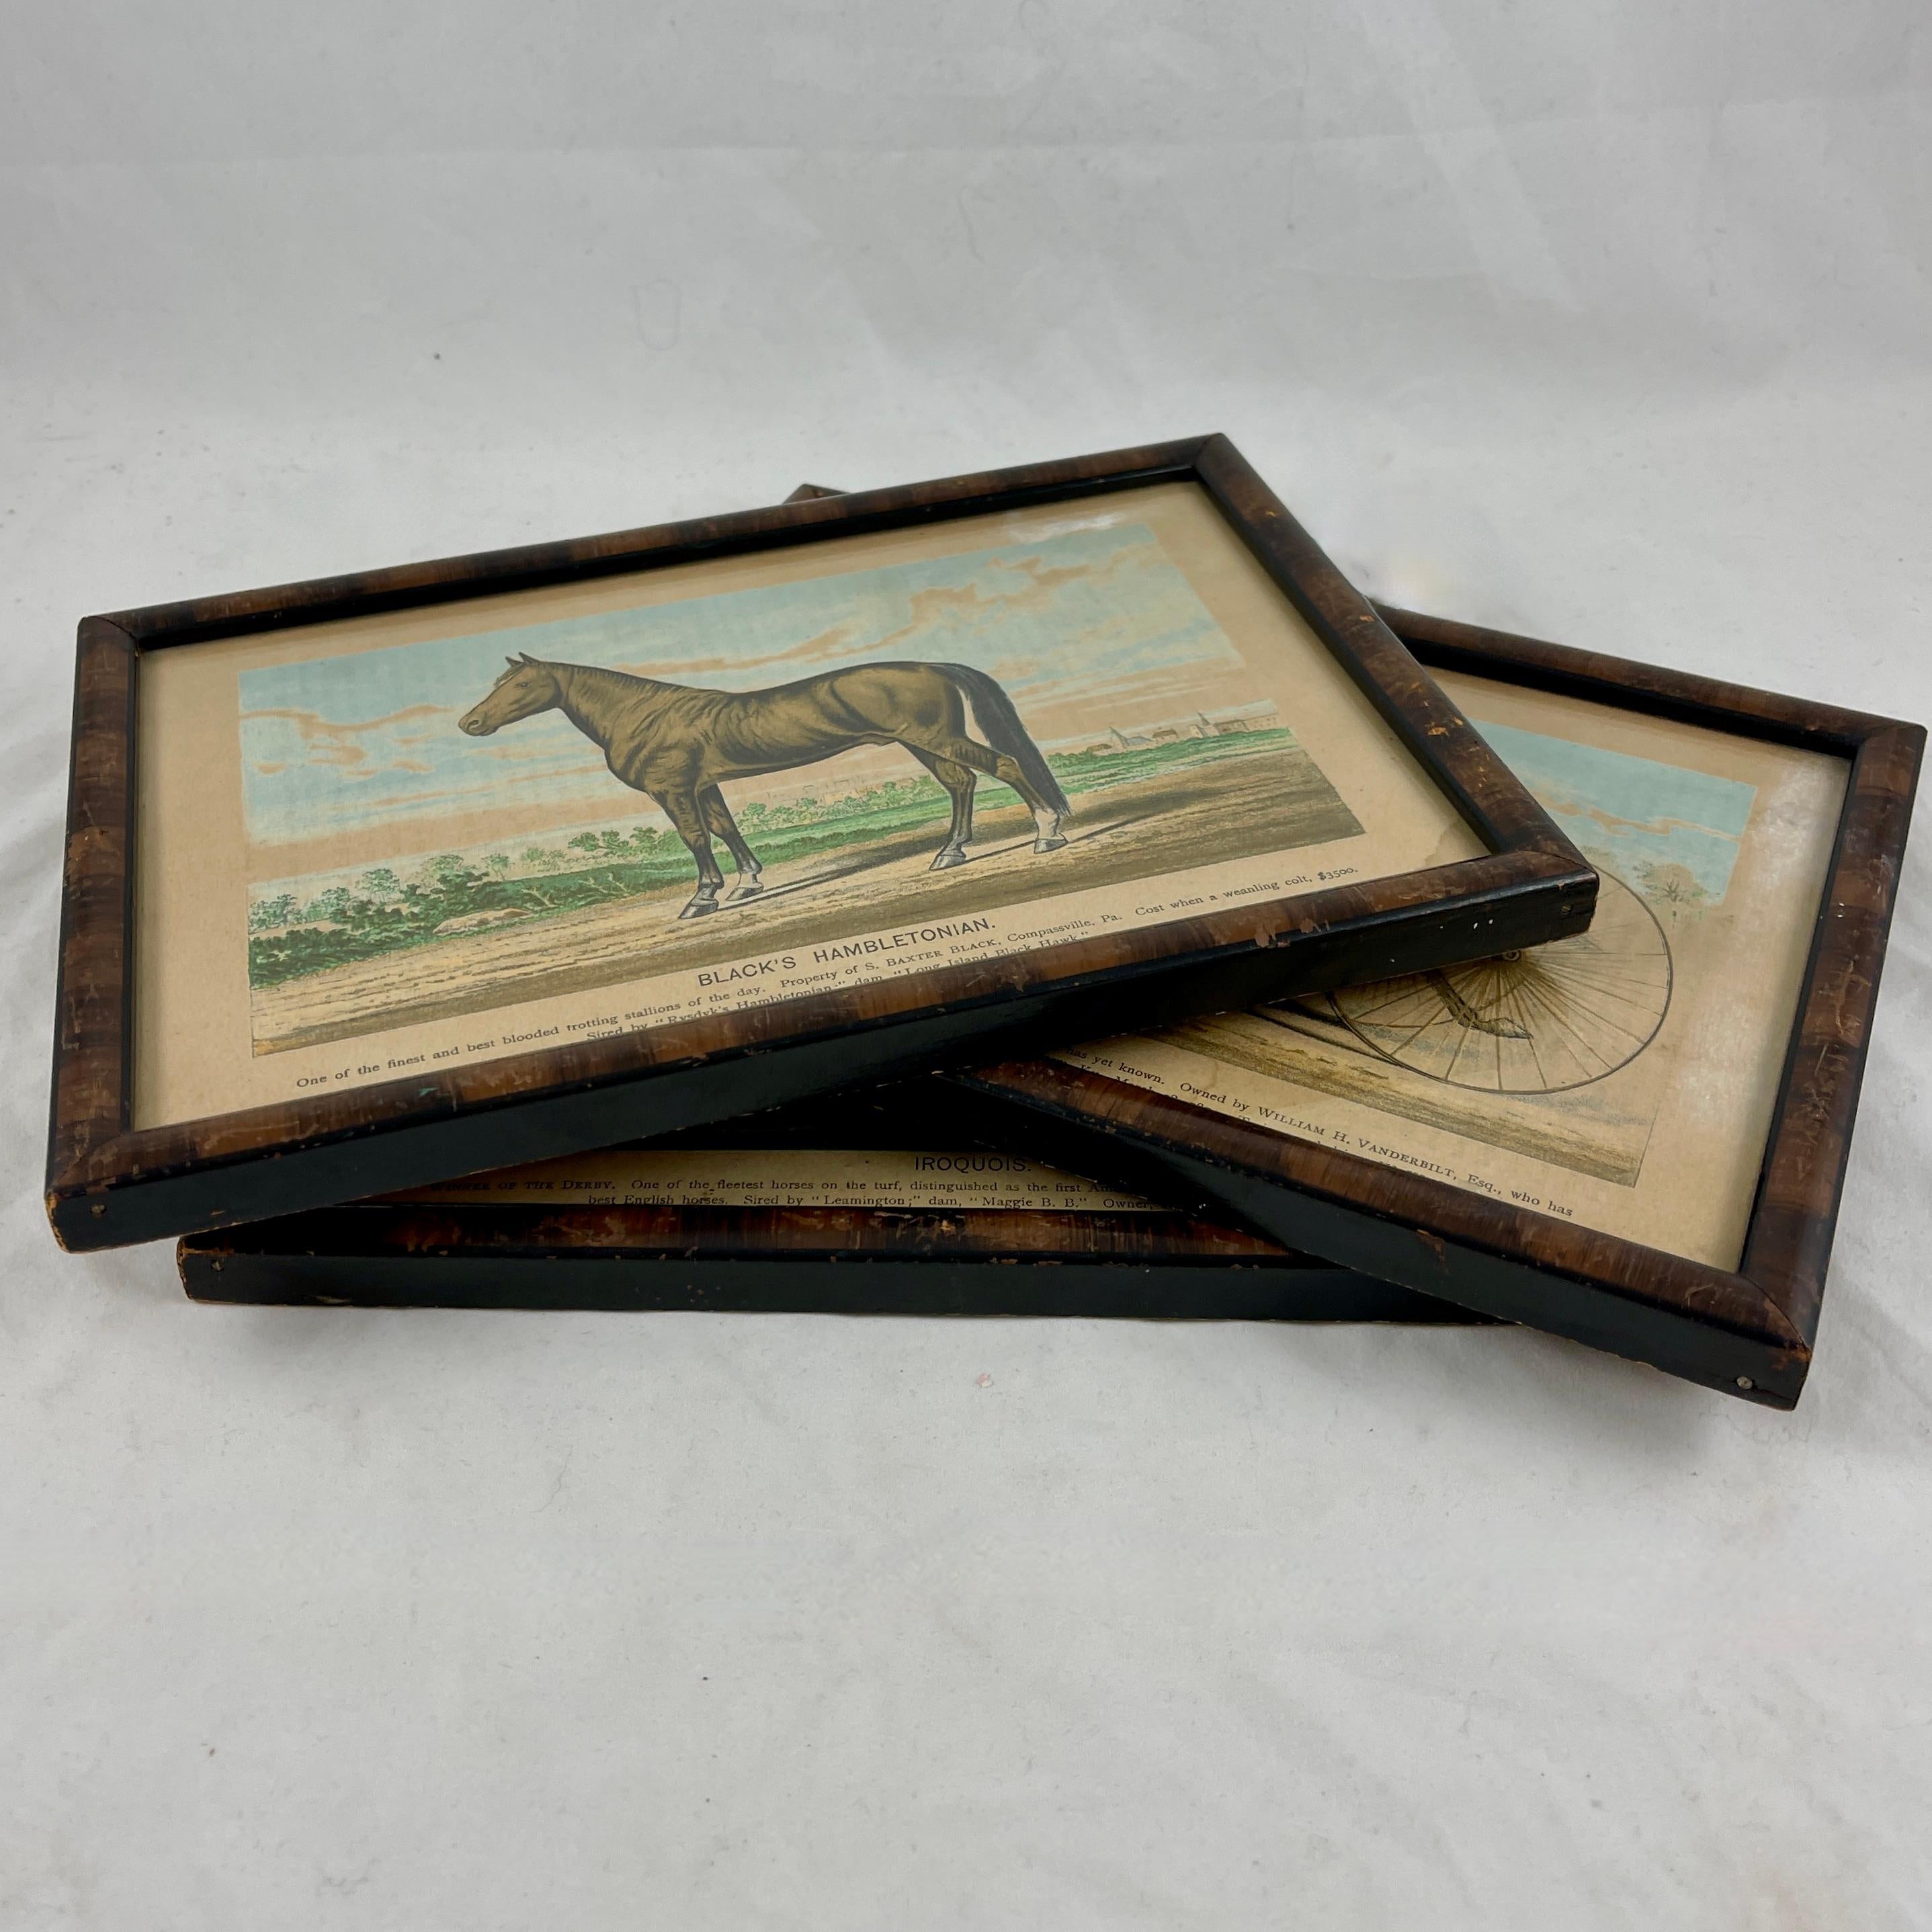 American Classical Framed Race Horse Champions Original Chromolithographs Printed in 1882, Set /3